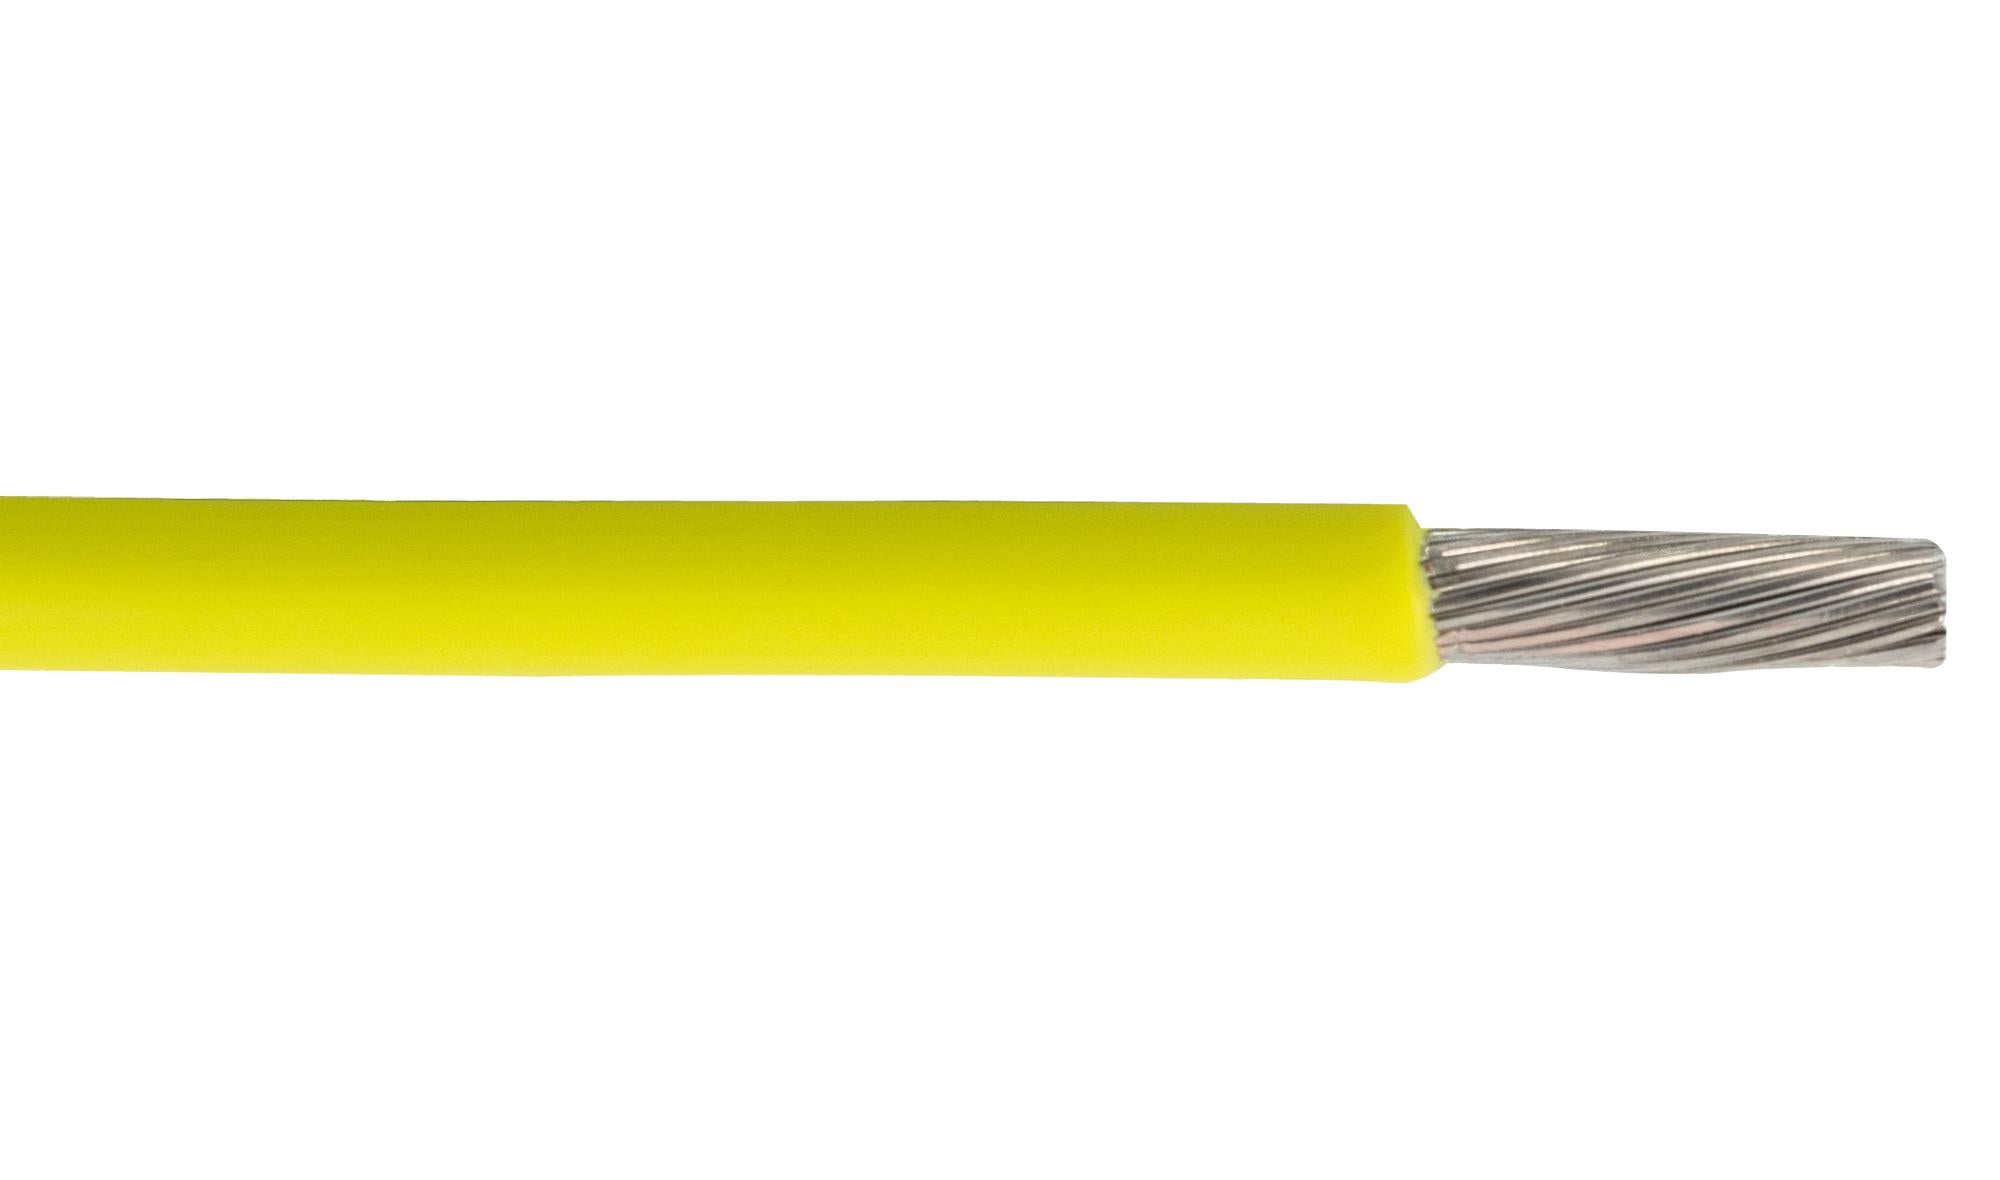 67010 YL HOOK-UP WIRE, 1MM2, YELLOW, PER M ALPHA WIRE